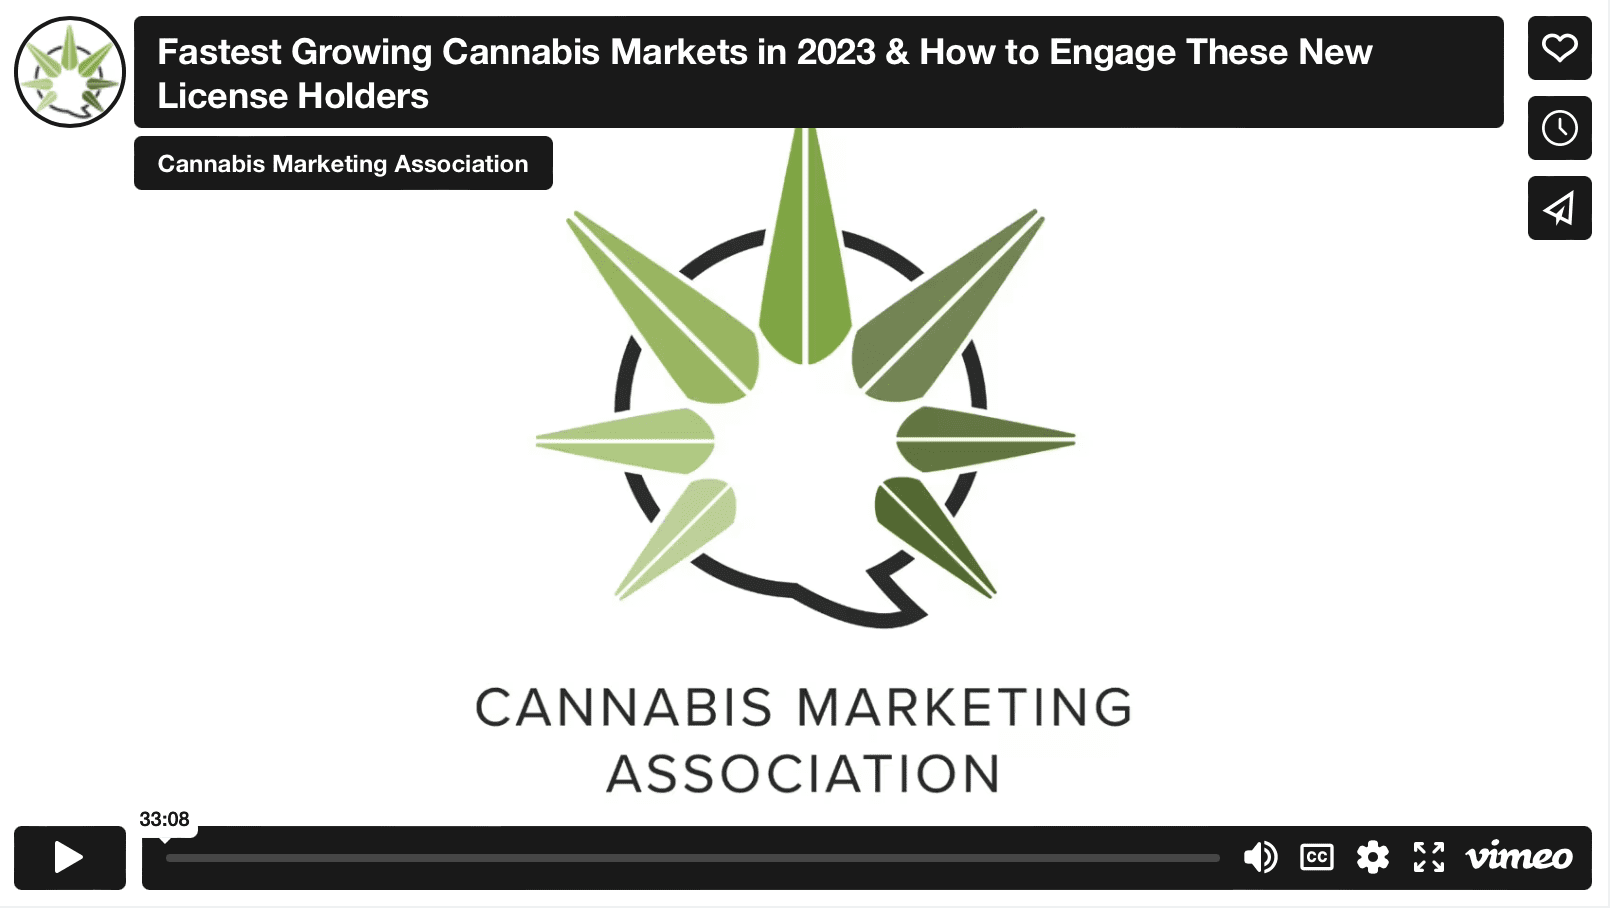 Fastest Growing Cannabis Markets in 2023 & How to Engage These New License Holders